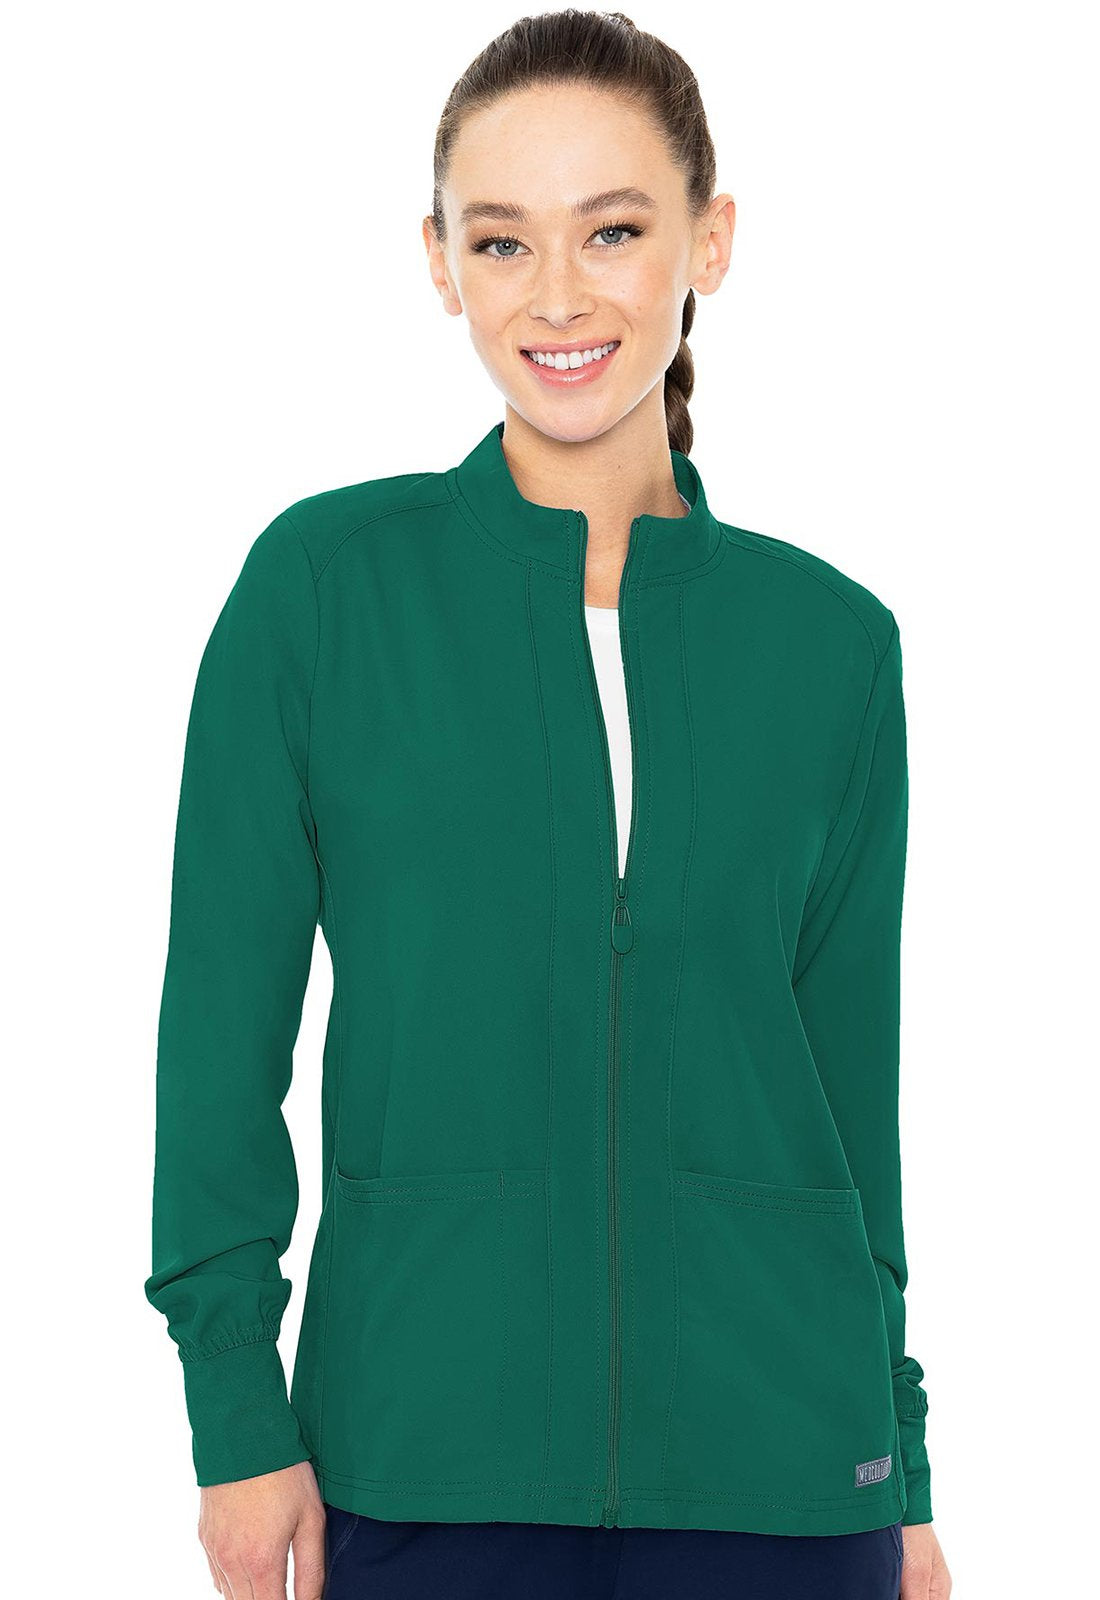 Med Couture MC Insight Hunter Green / 2XL MC Insight  Zip Front Warm-Up With Shoulder Yokes MC2660